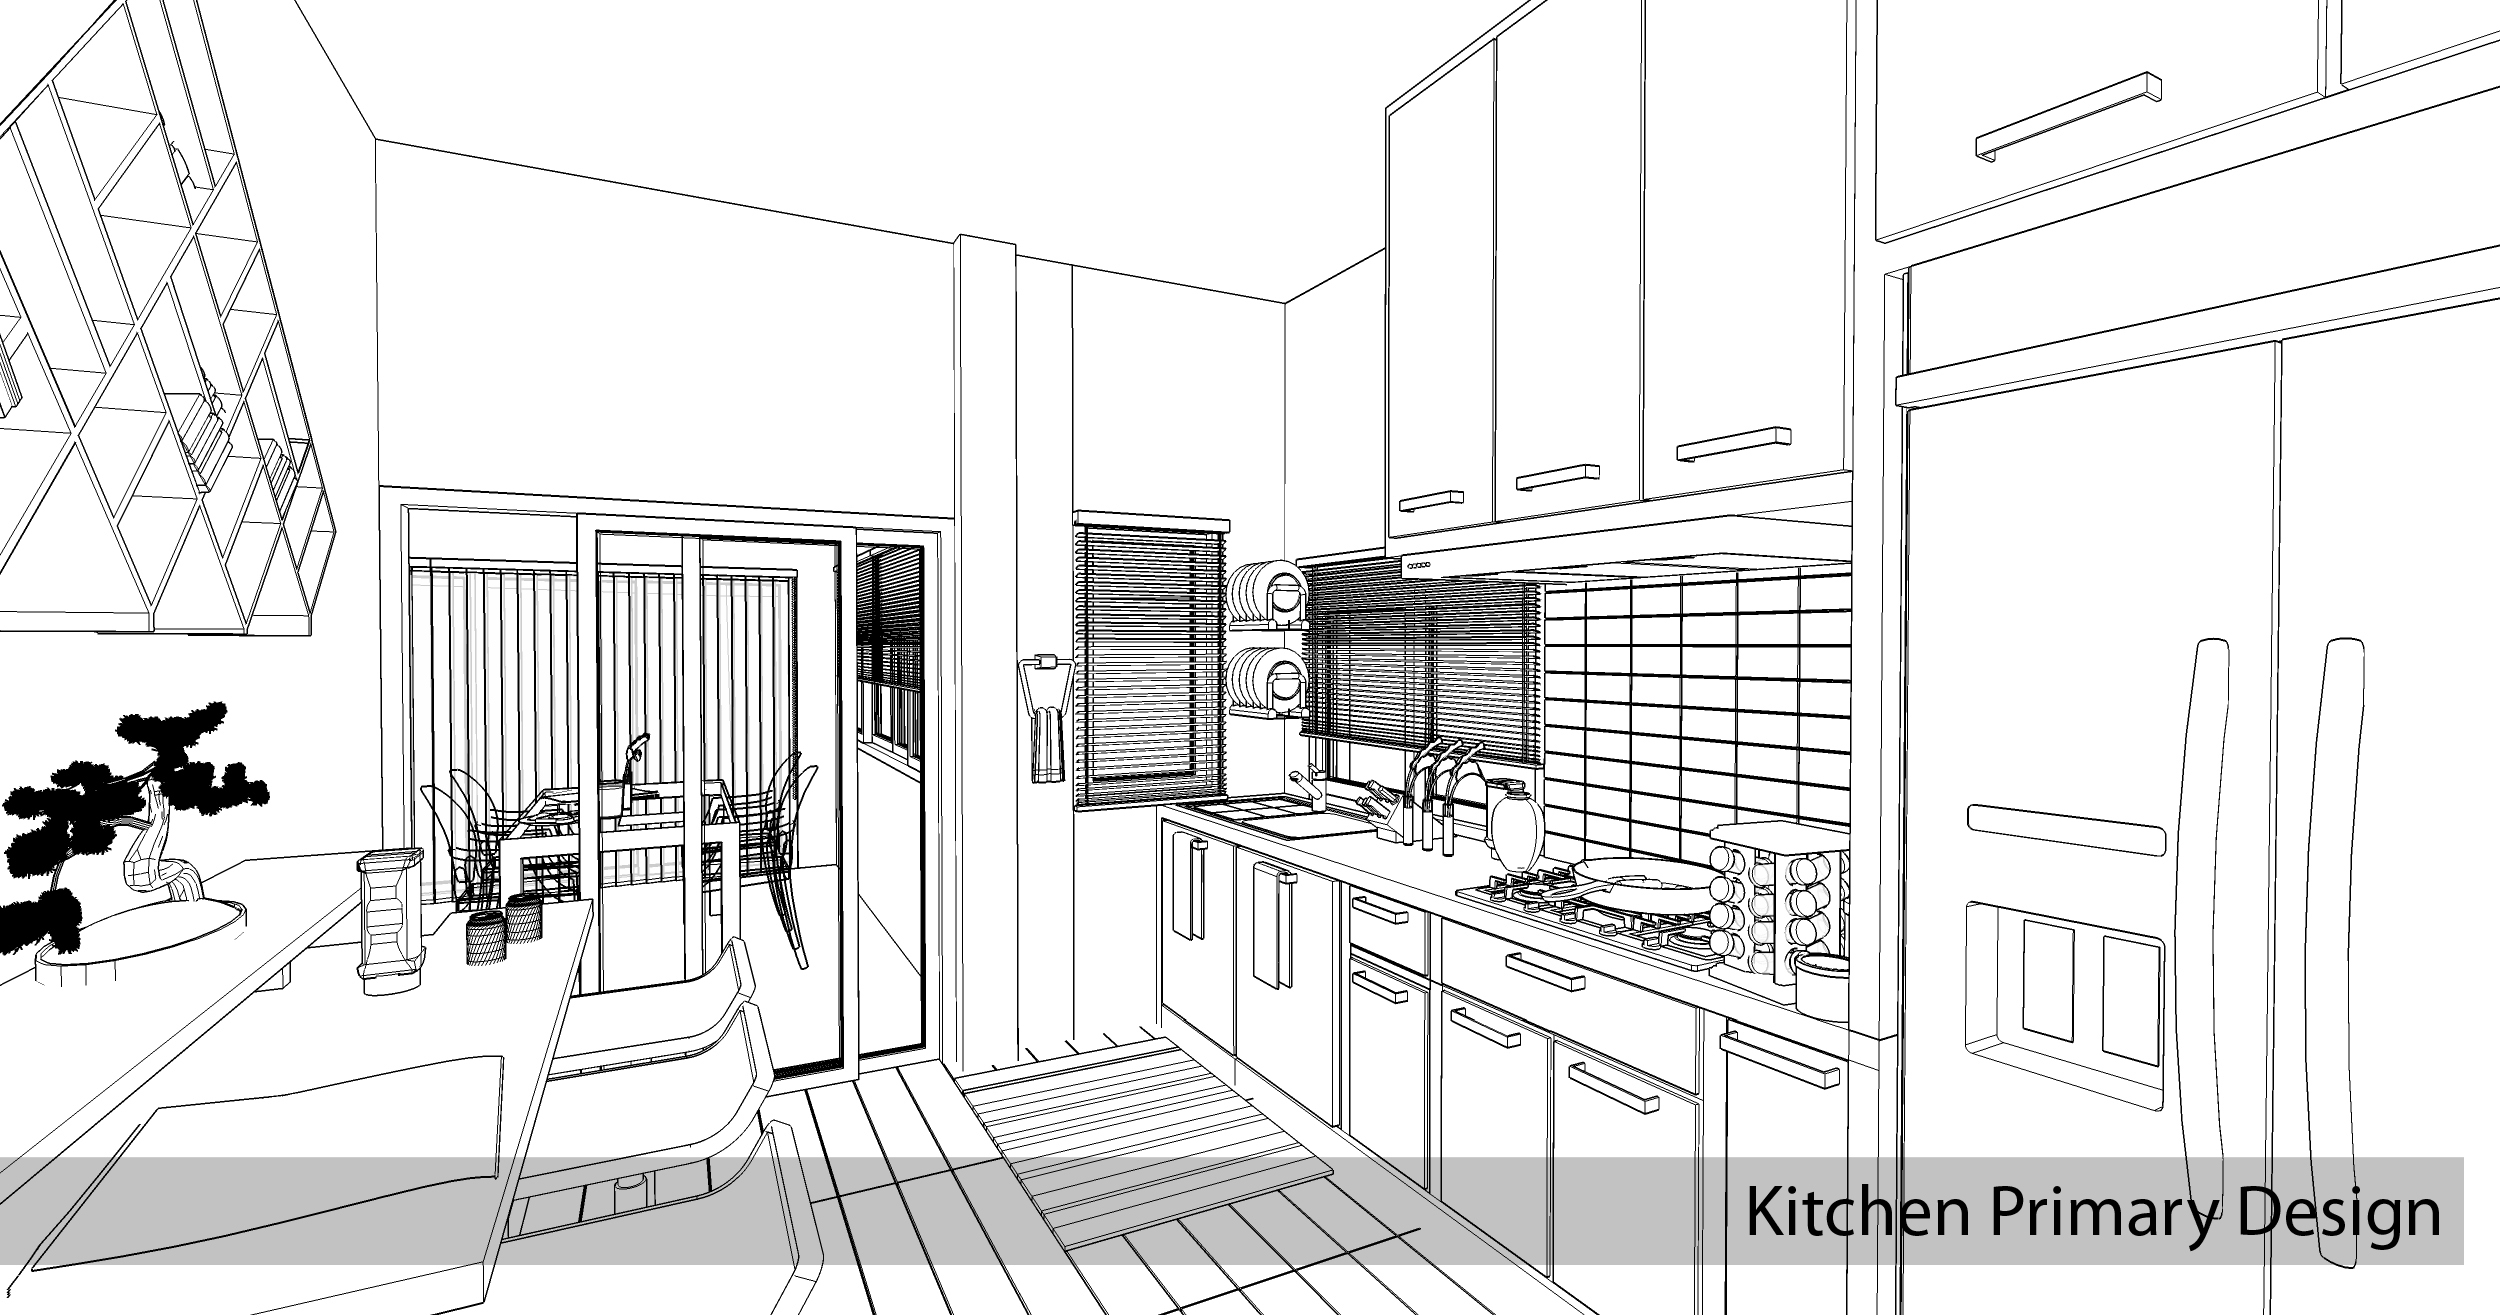 My story with sketchup